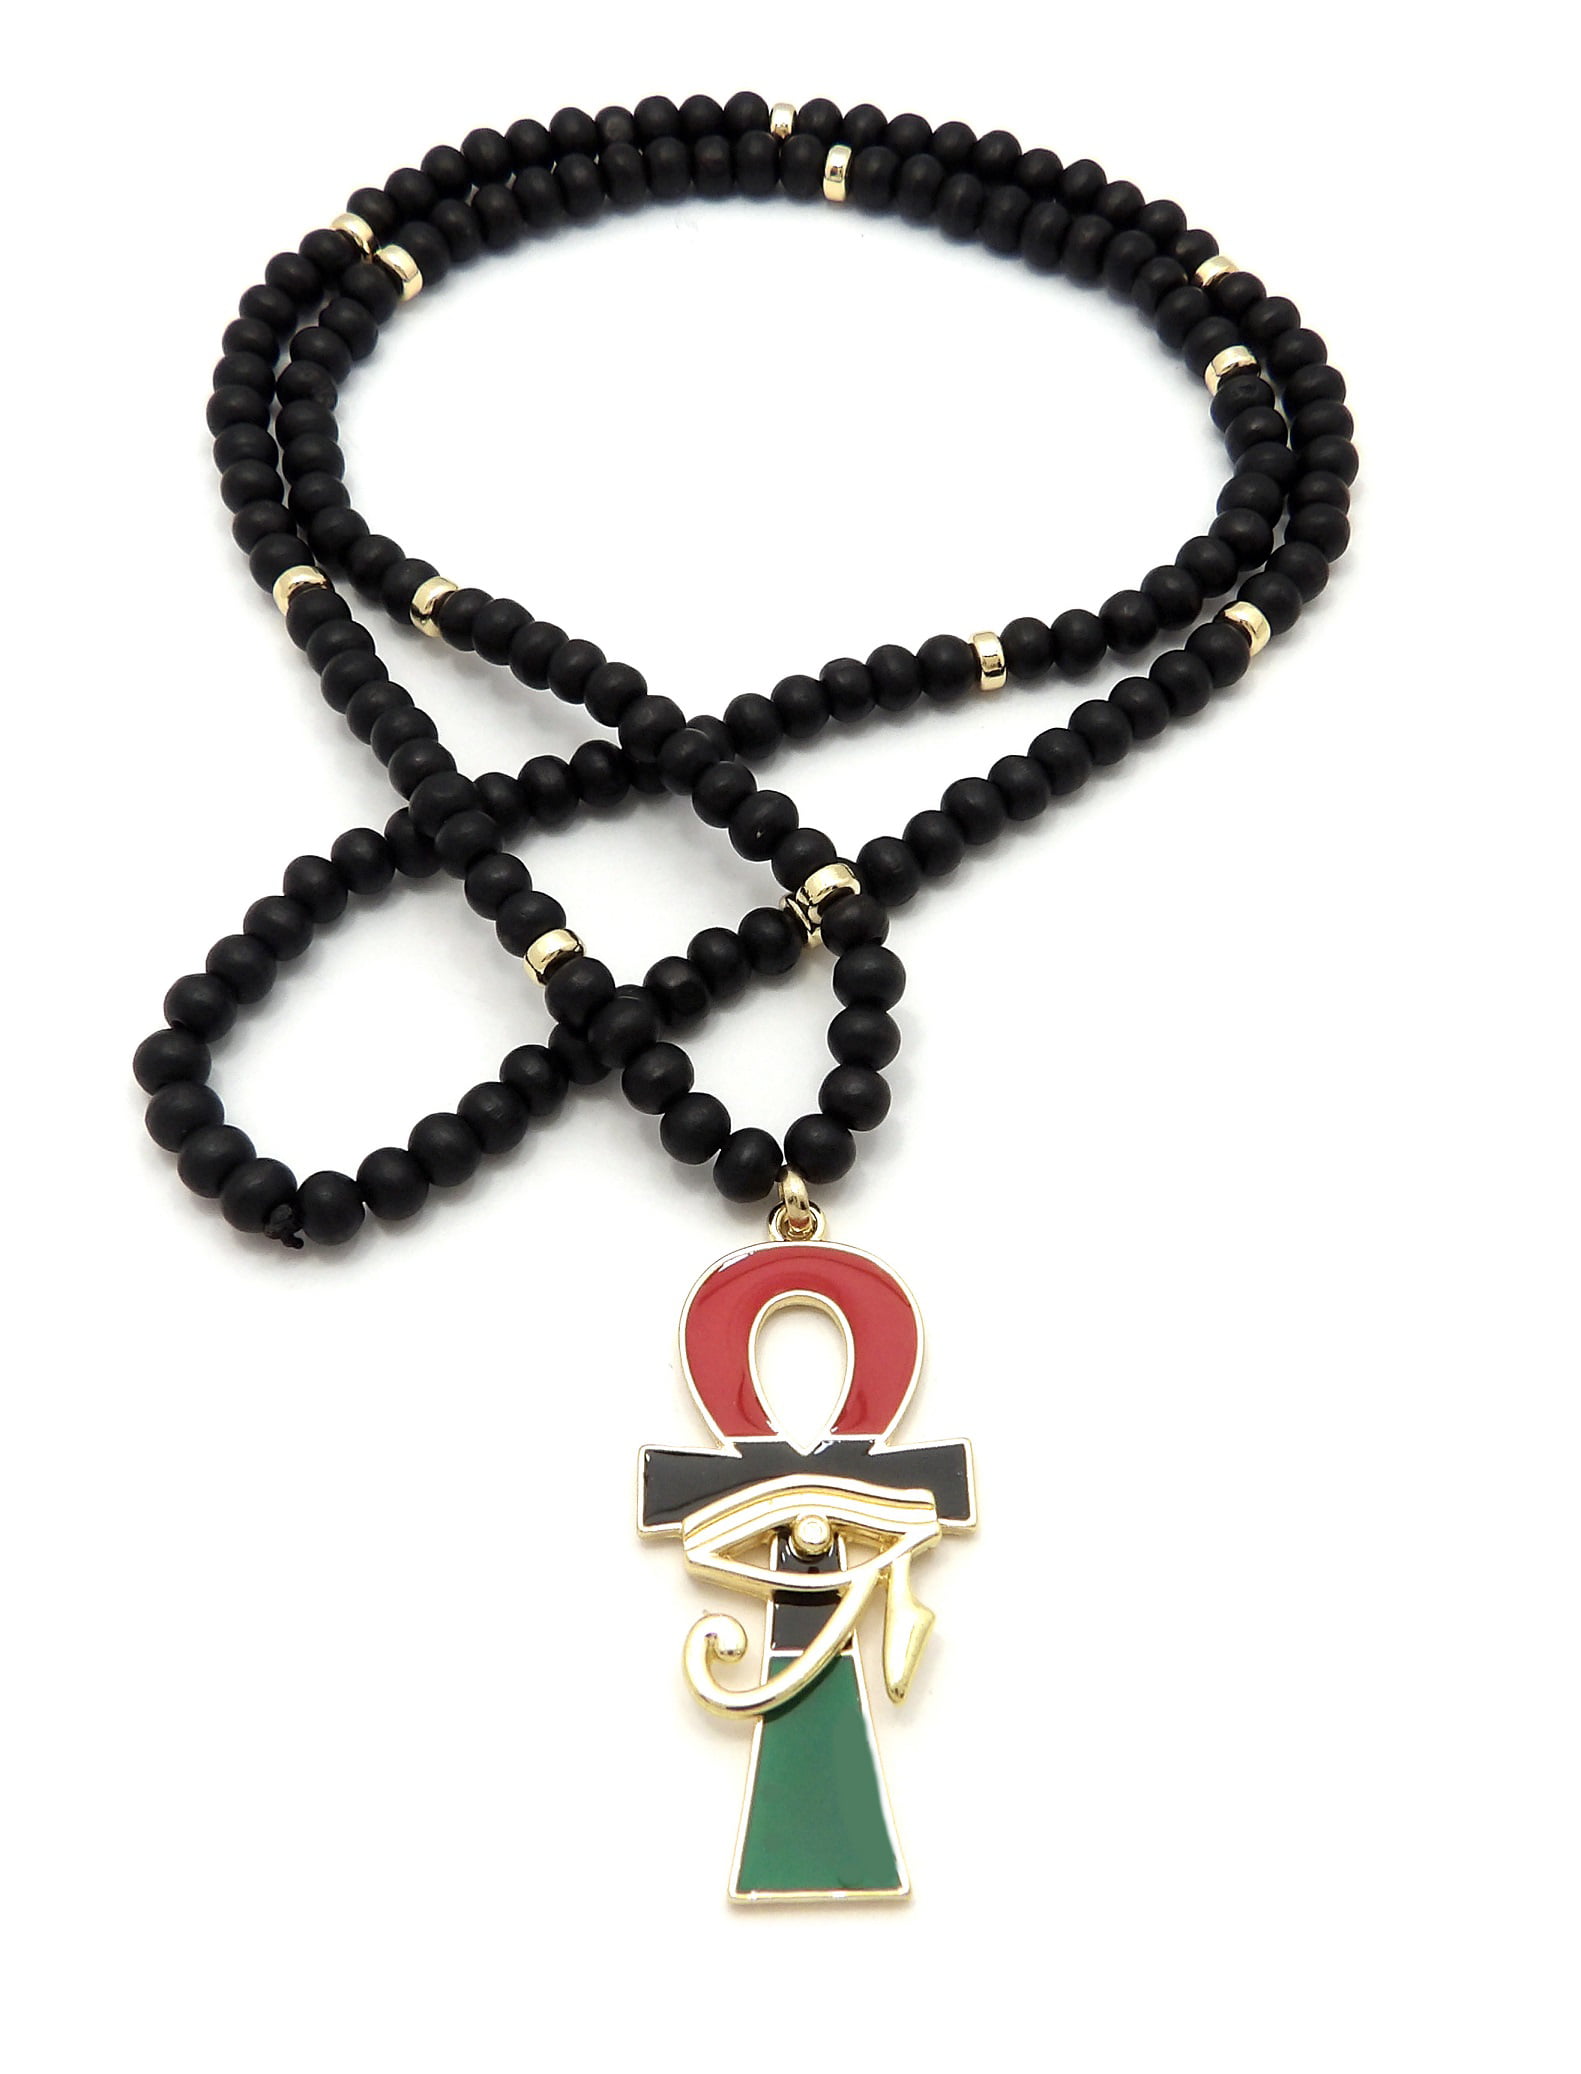 Details about   Hip Hop Egyptian Eye of Horus Bling Pendant & 10mm 24" Wooden Wood Bead Necklace